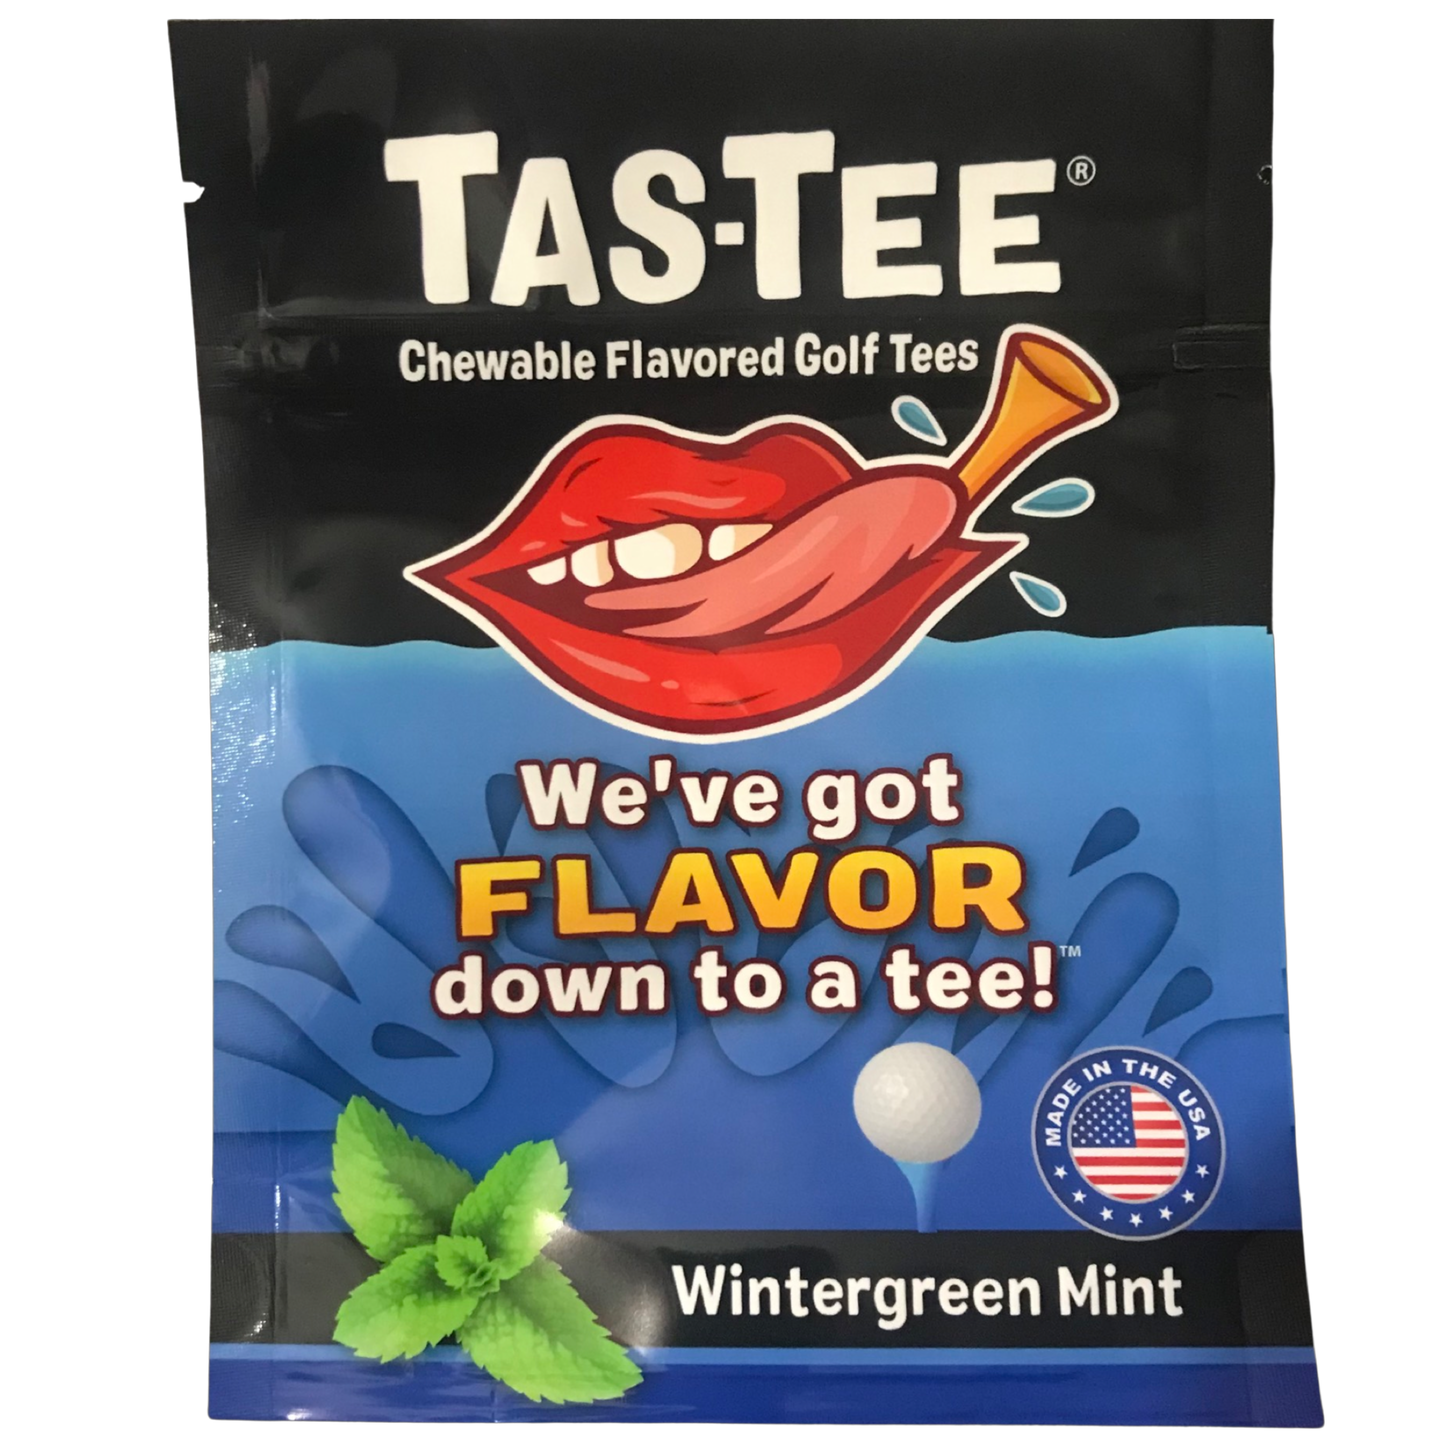 Wintergreen Mint Resealable Pouch - 20 count